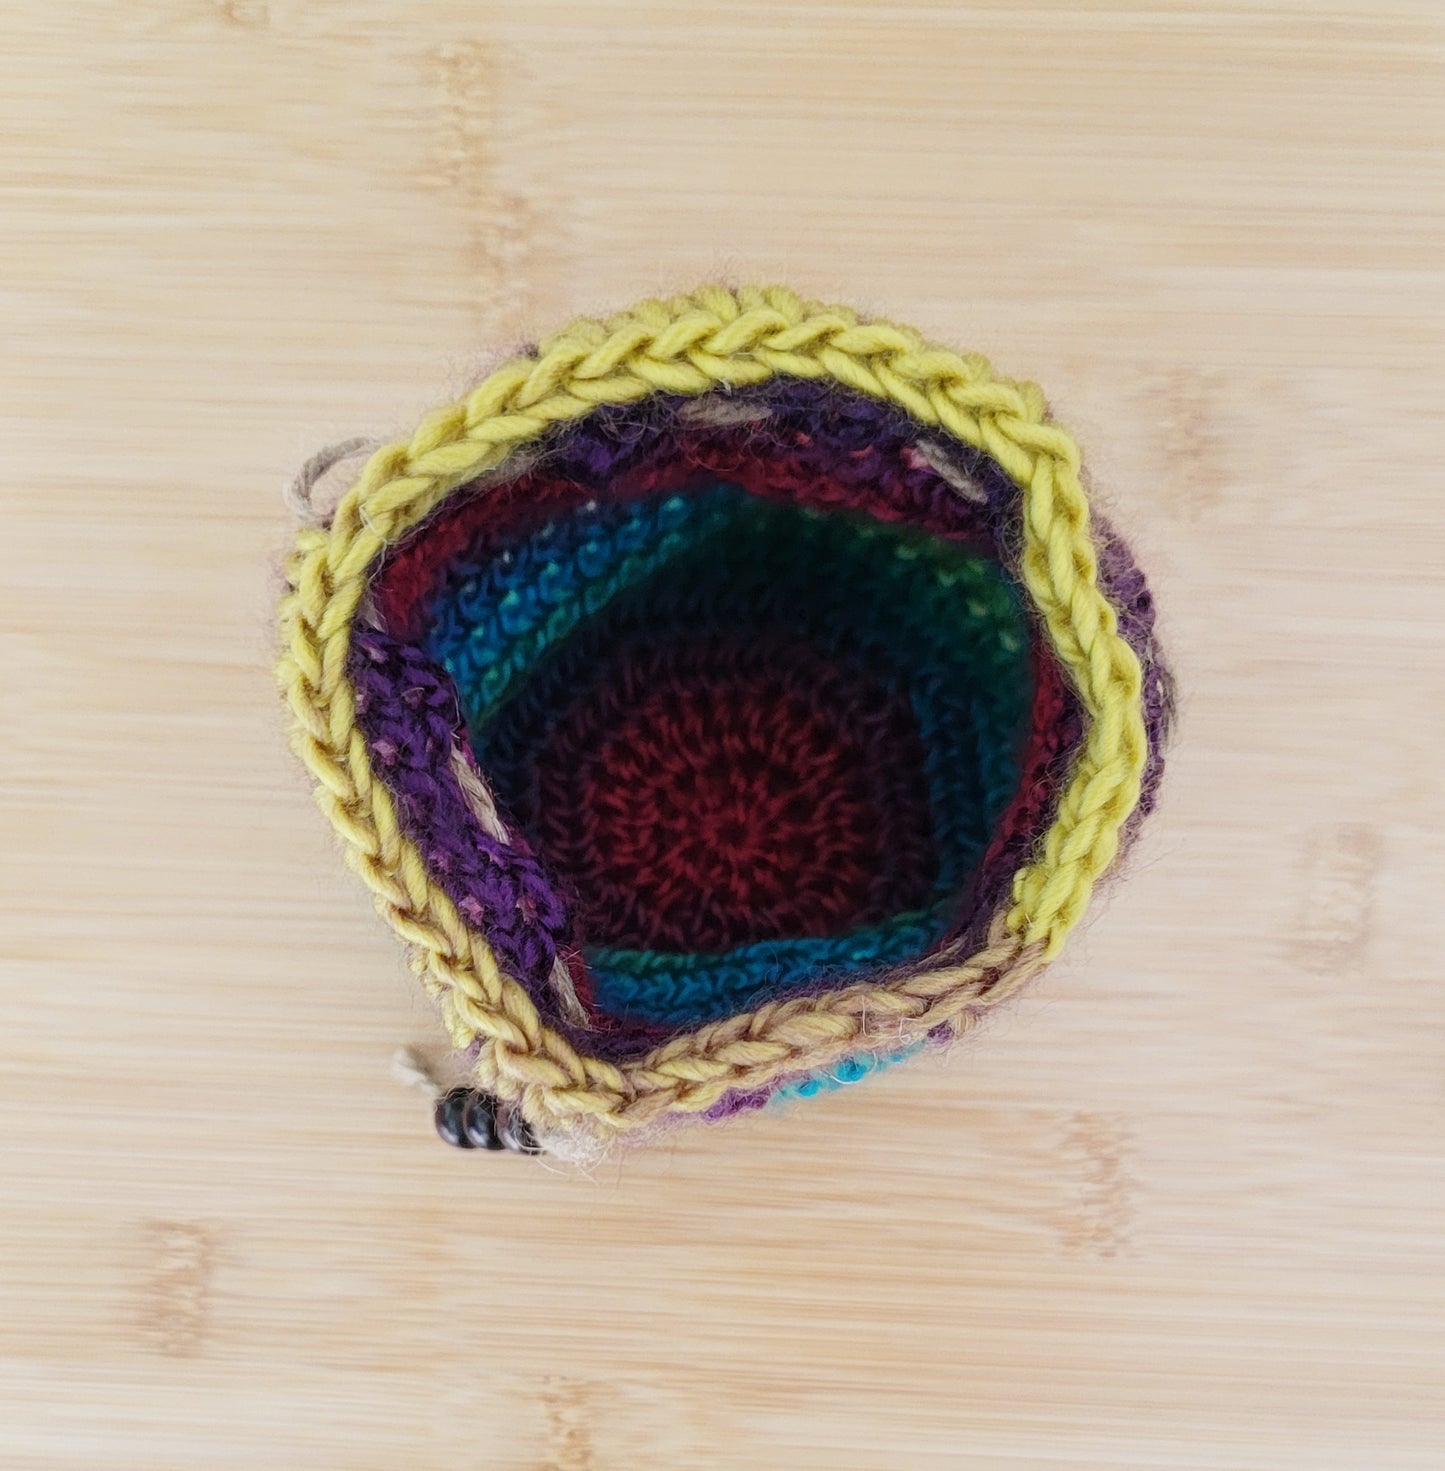 Jewel Toned Rainbow Dice Bag - Hand crocheted Draw String Pouch